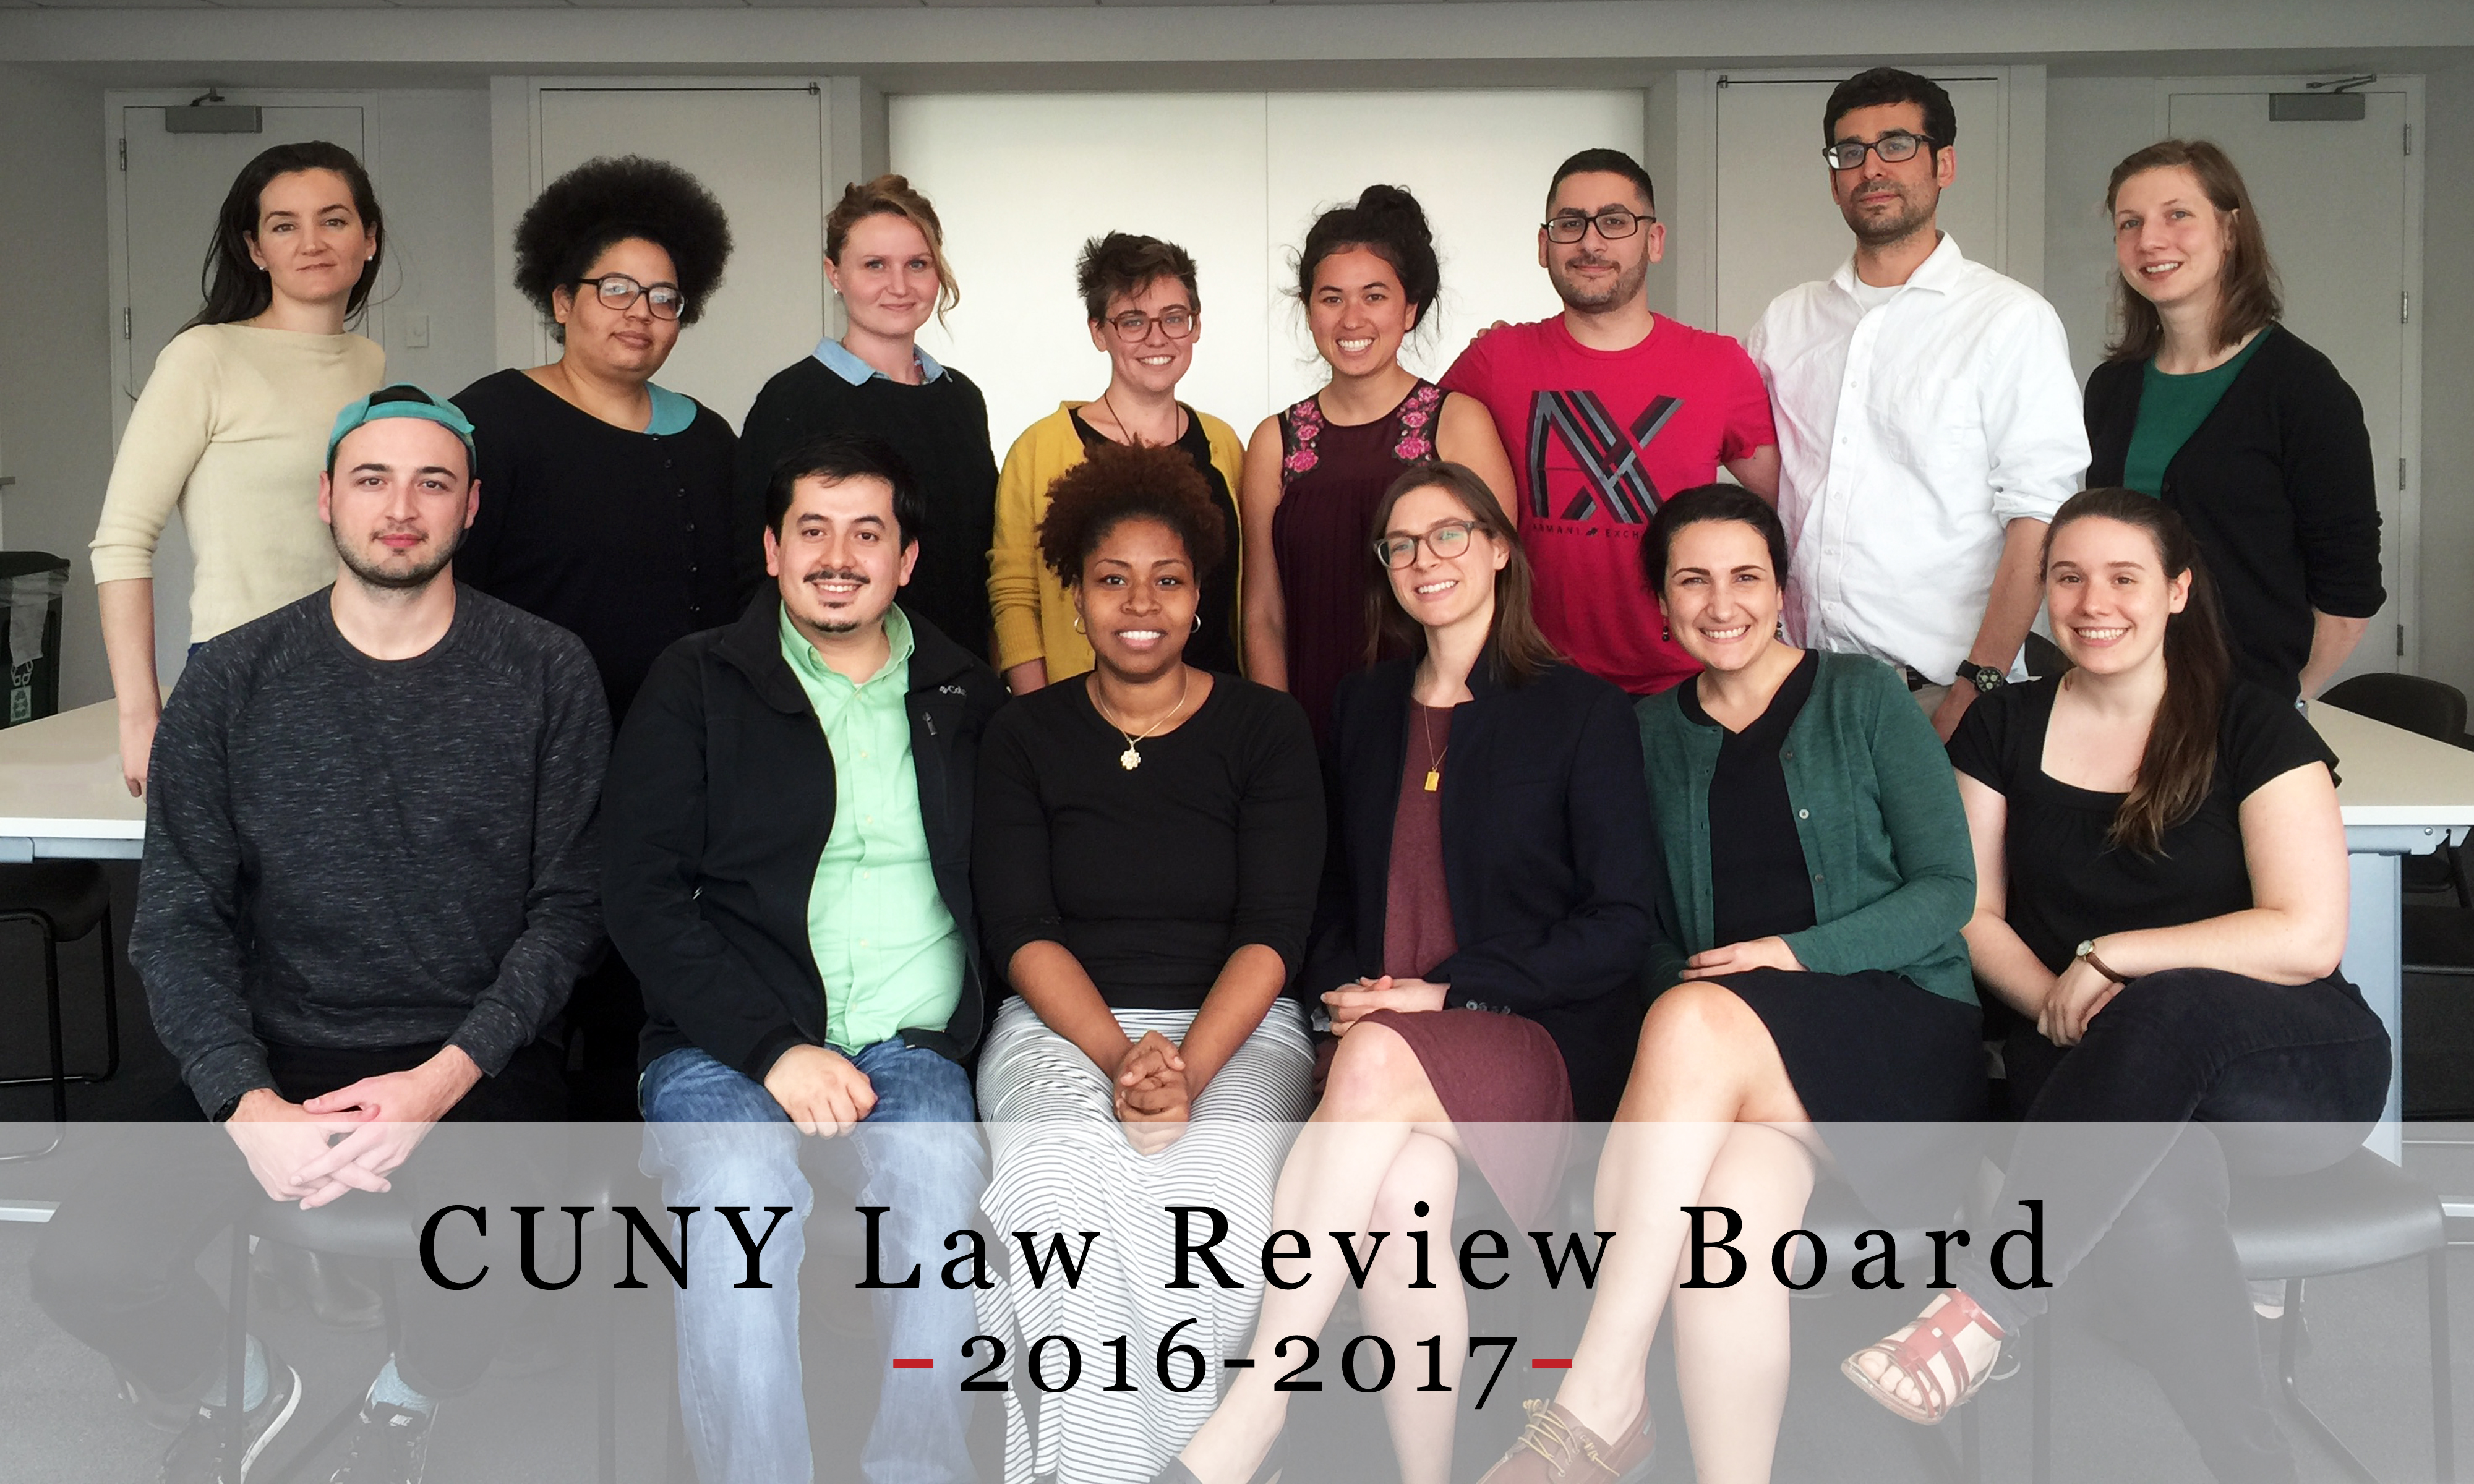 CUNY Law Review Board 2016-2017